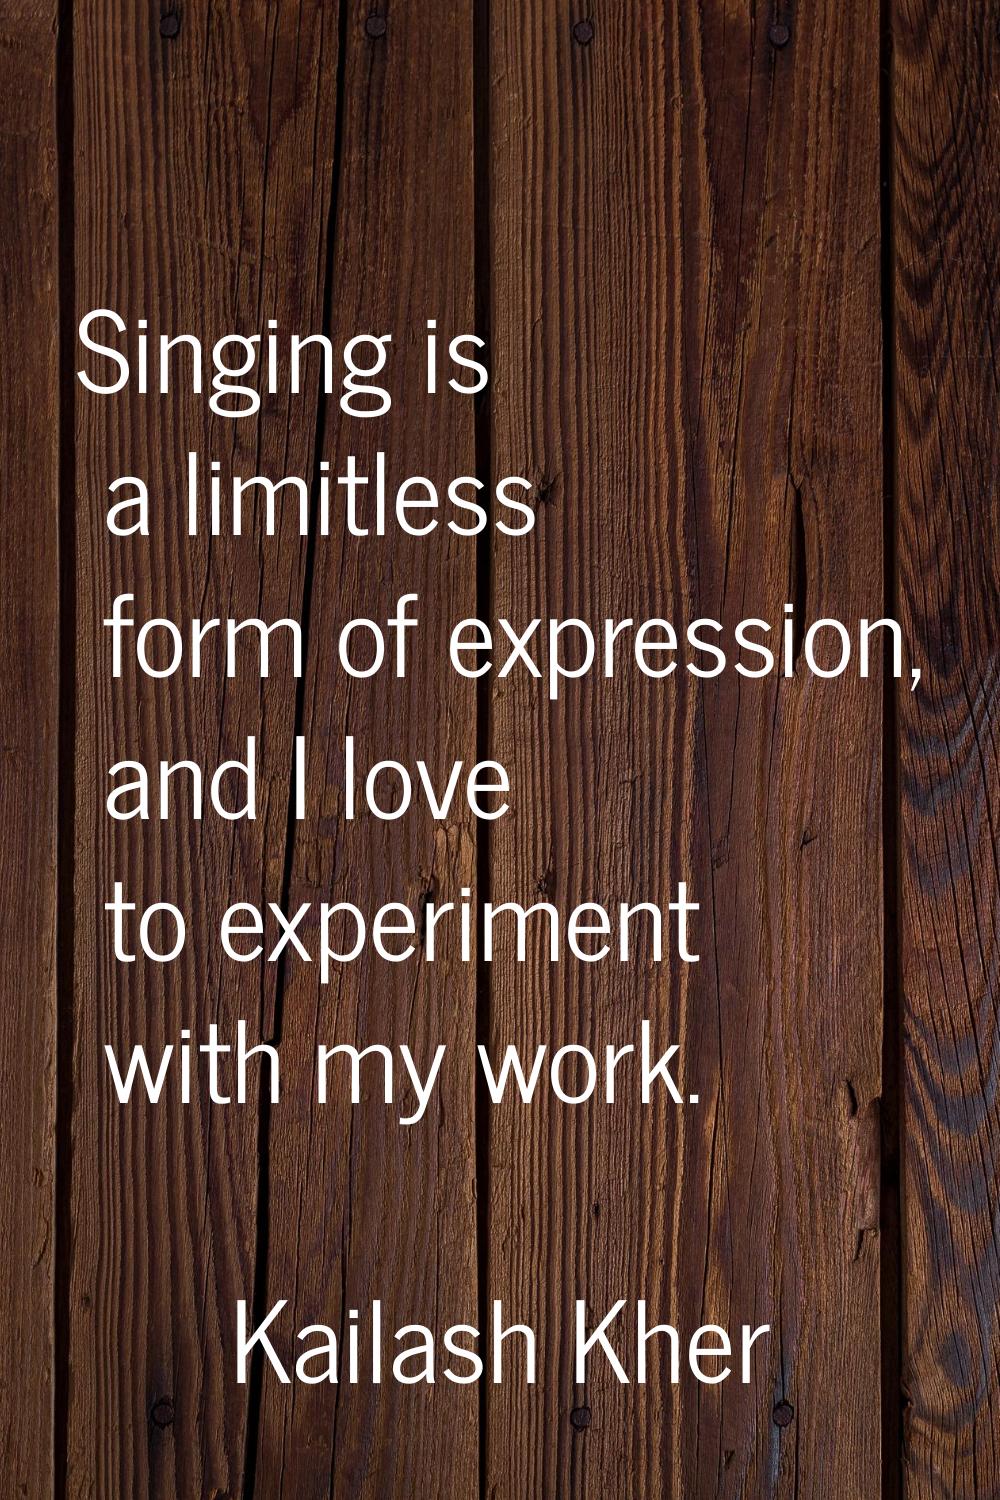 Singing is a limitless form of expression, and I love to experiment with my work.